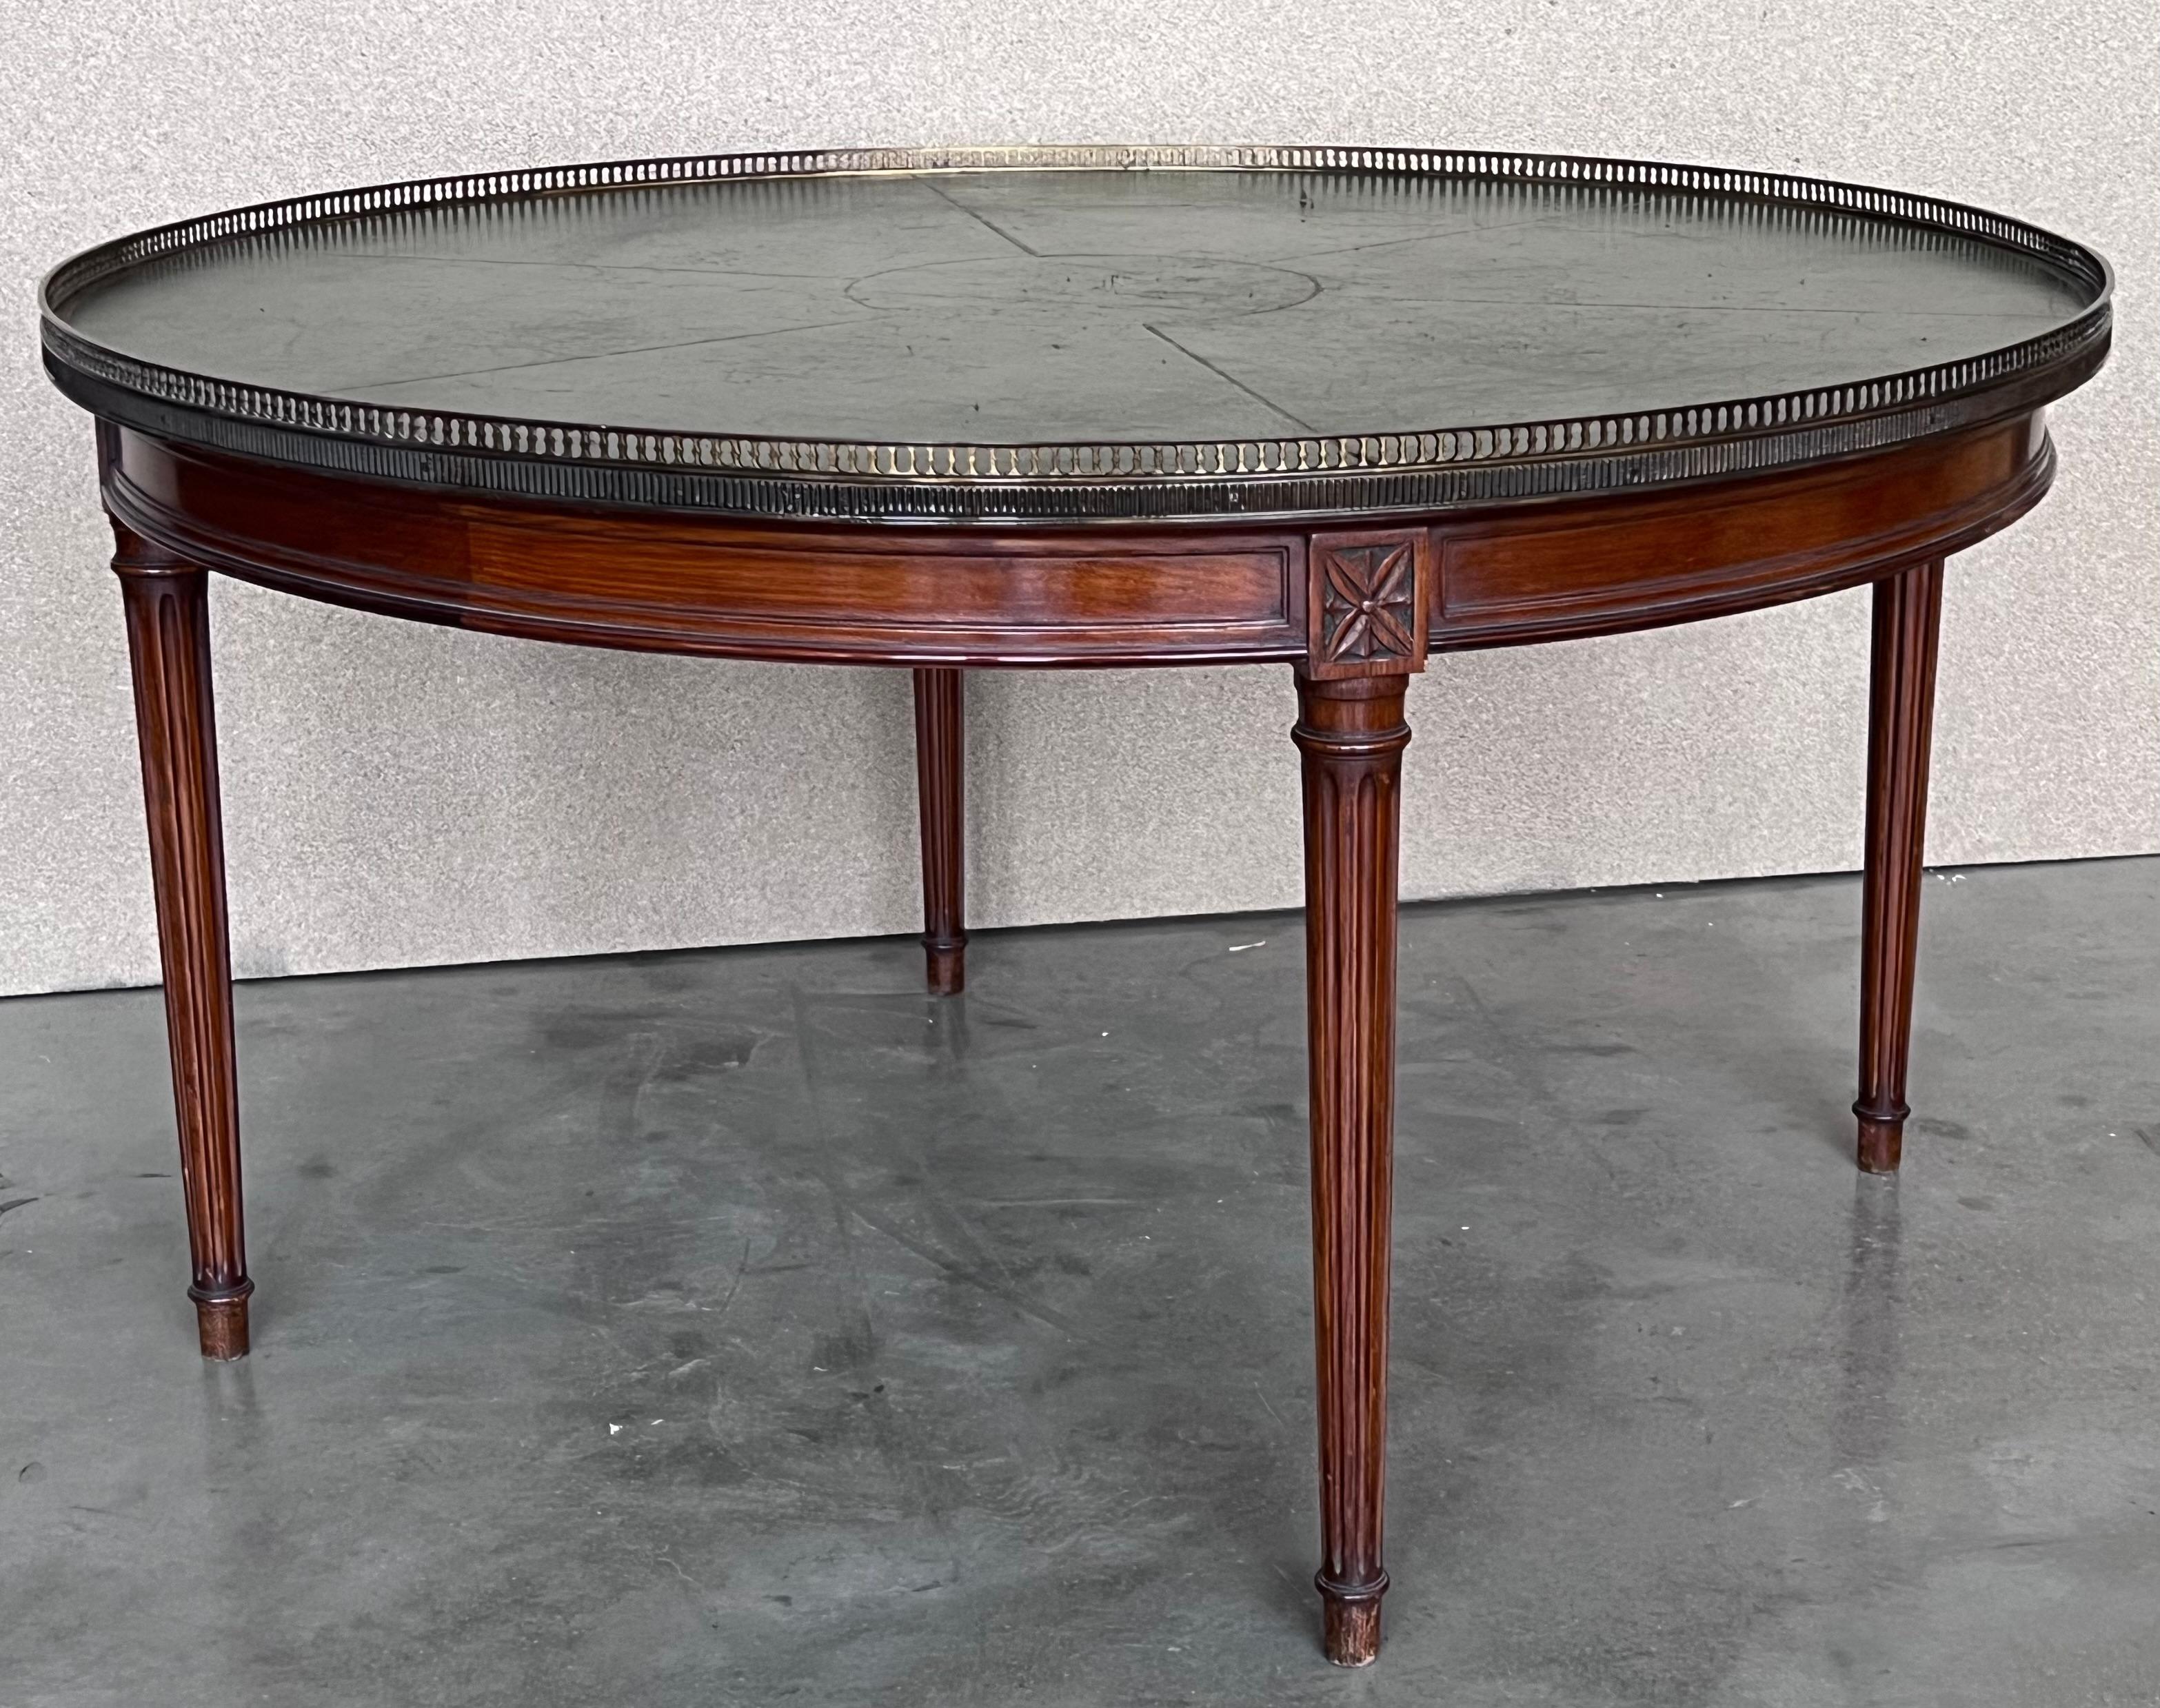 French Provincial Mahogany with Stenciled Leather Top Round Coffee Table In Good Condition For Sale In Miami, FL